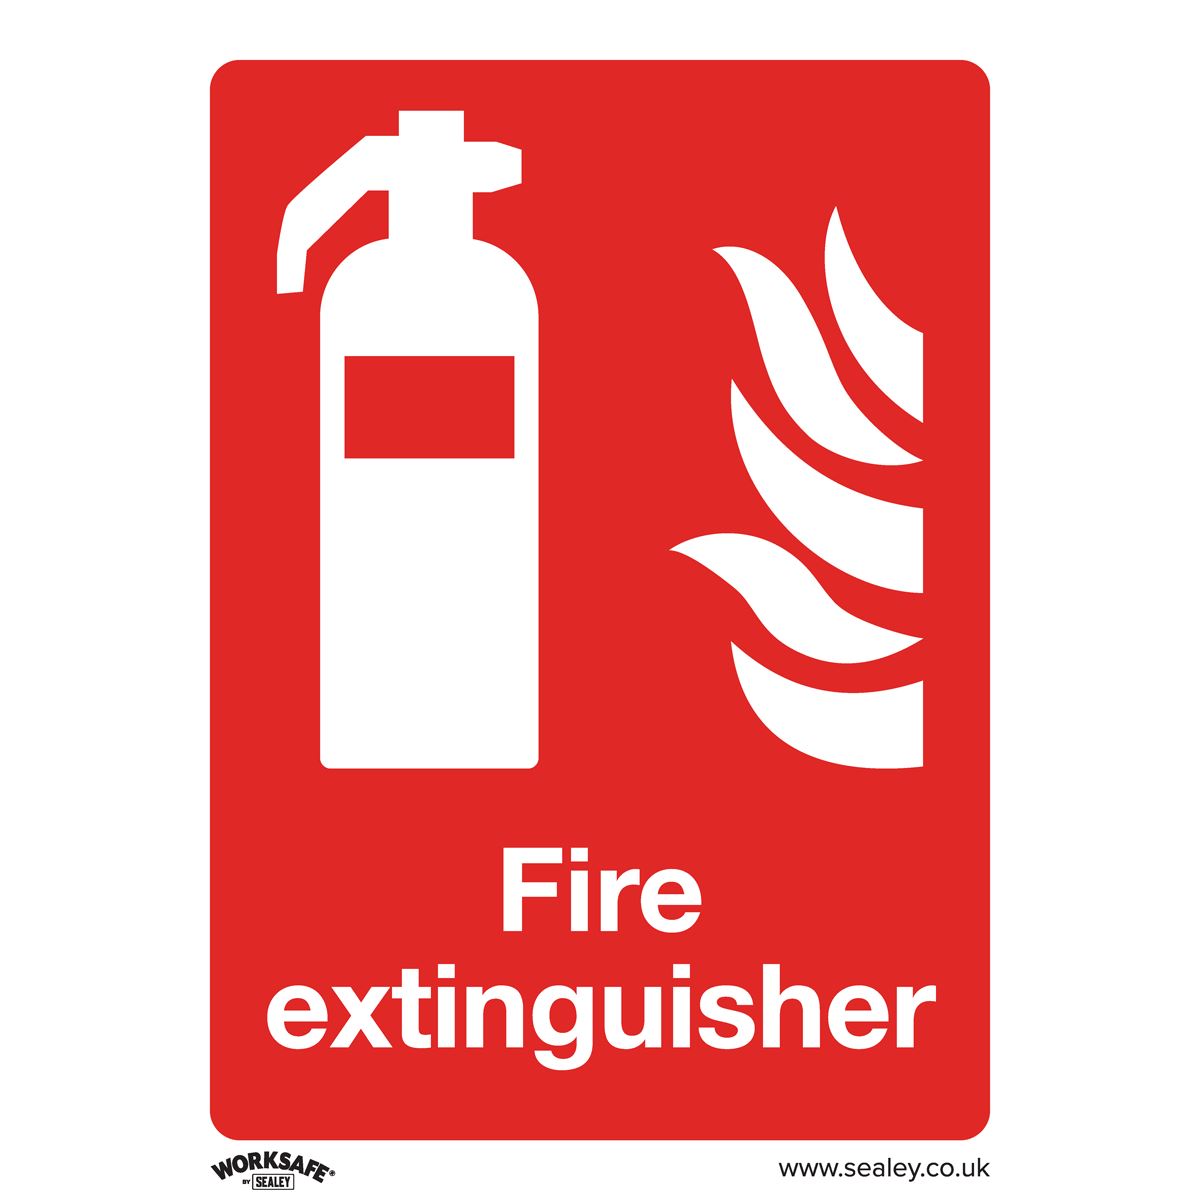 Worksafe by Sealey Prohibition Safety Sign - Fire Extinguisher - Rigid Plastic - Pack of 10